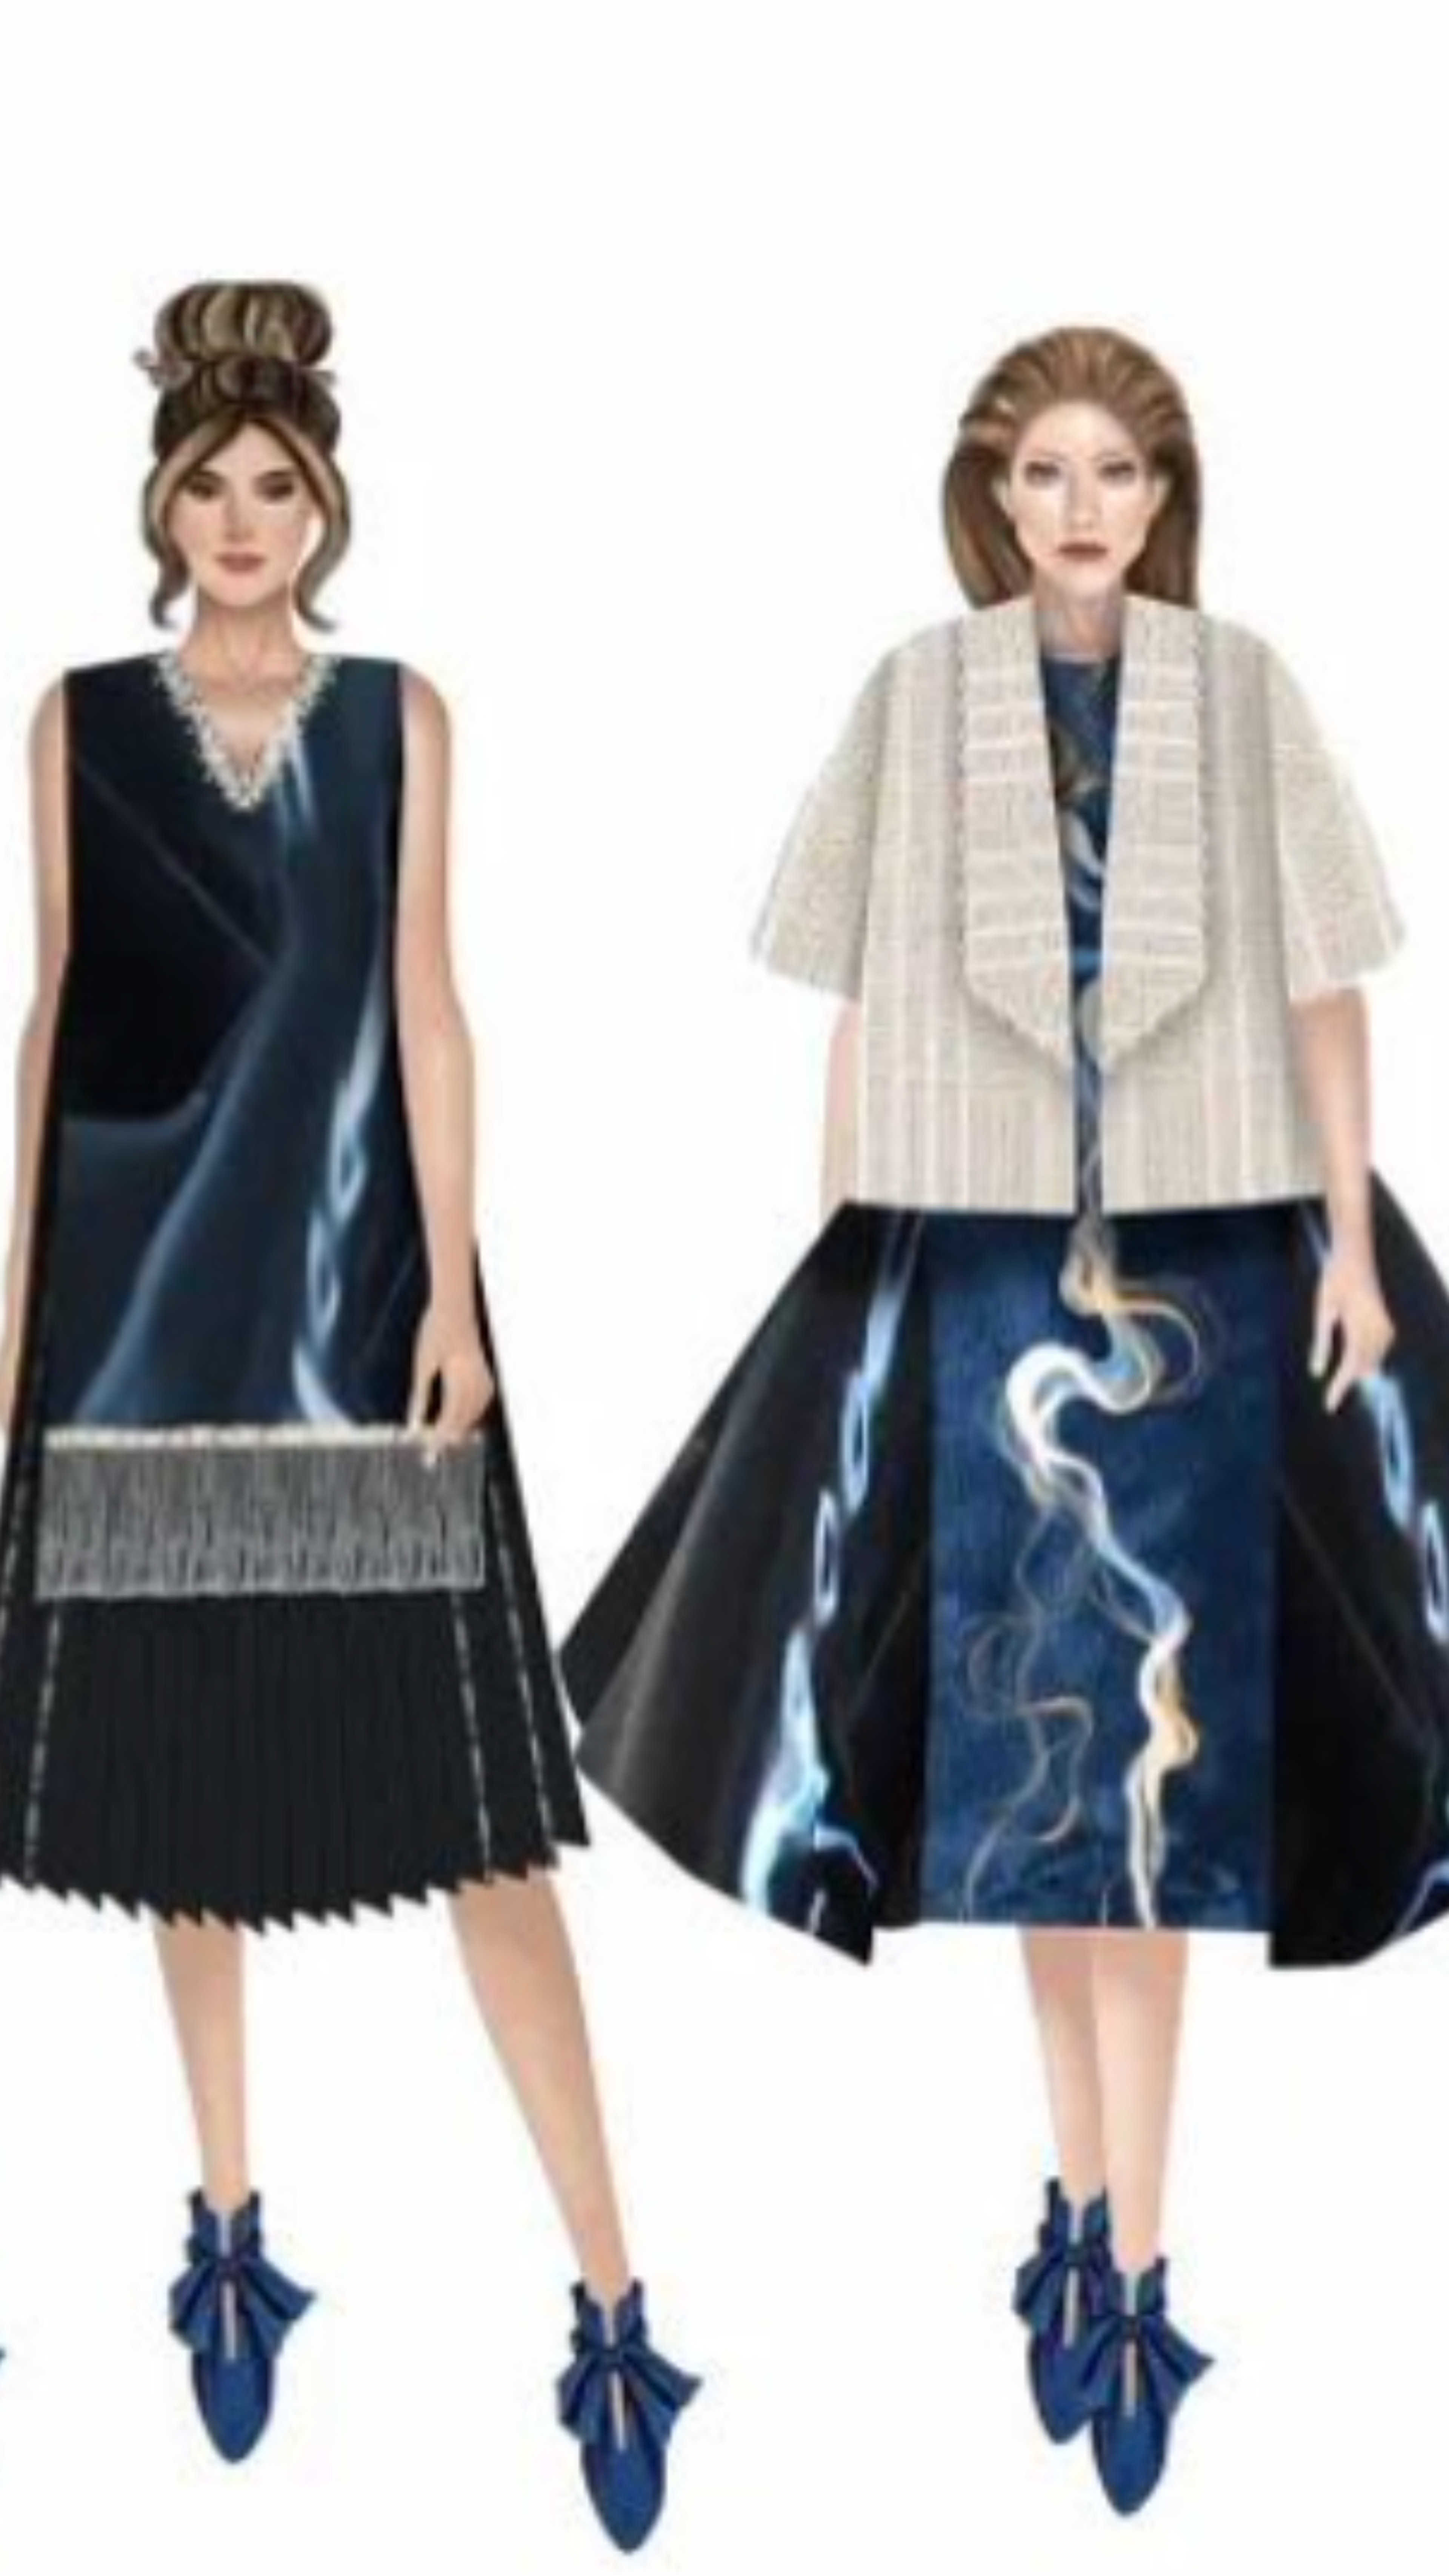 Drawings of avant-garde fashion with structured jackets and fluid skirts in striking blue, showcasing an illustrated modern eclectic style.